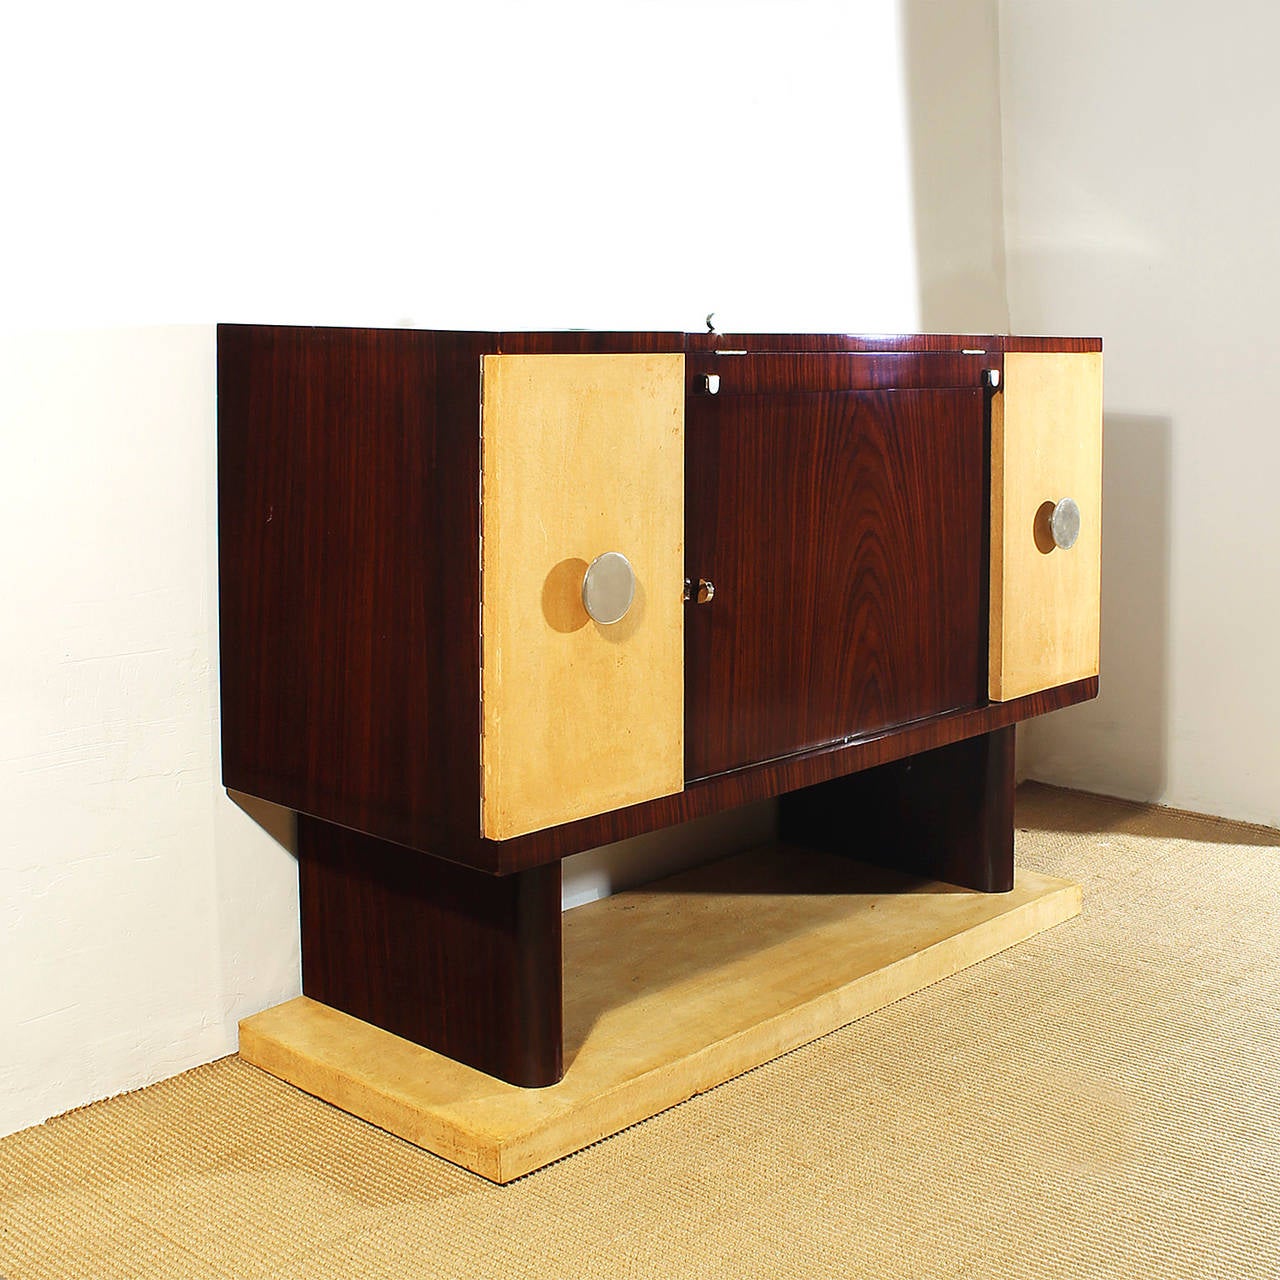 Small Art Deco system dry bar, rosewood veneer, french polish, 2 side doors covered with original parchment, one for bottles and the other one with 3 drawers, central pivotal door with places for bottles and glasses. Small flap plate on top for